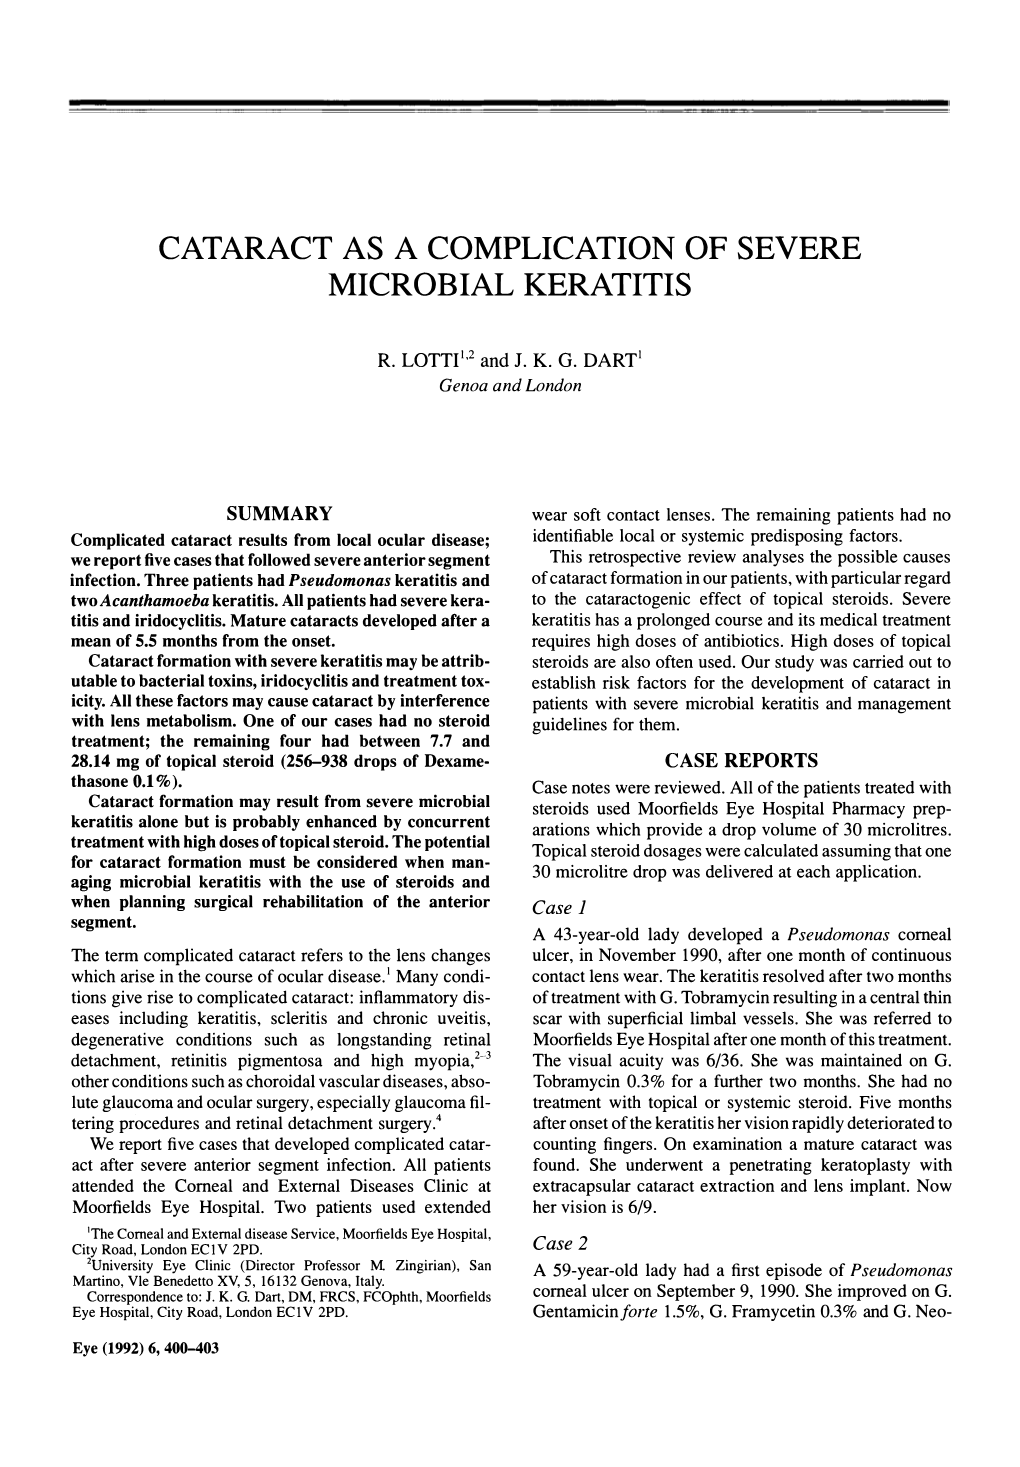 Cataract As a Complication of Severe Microbial Keratitis